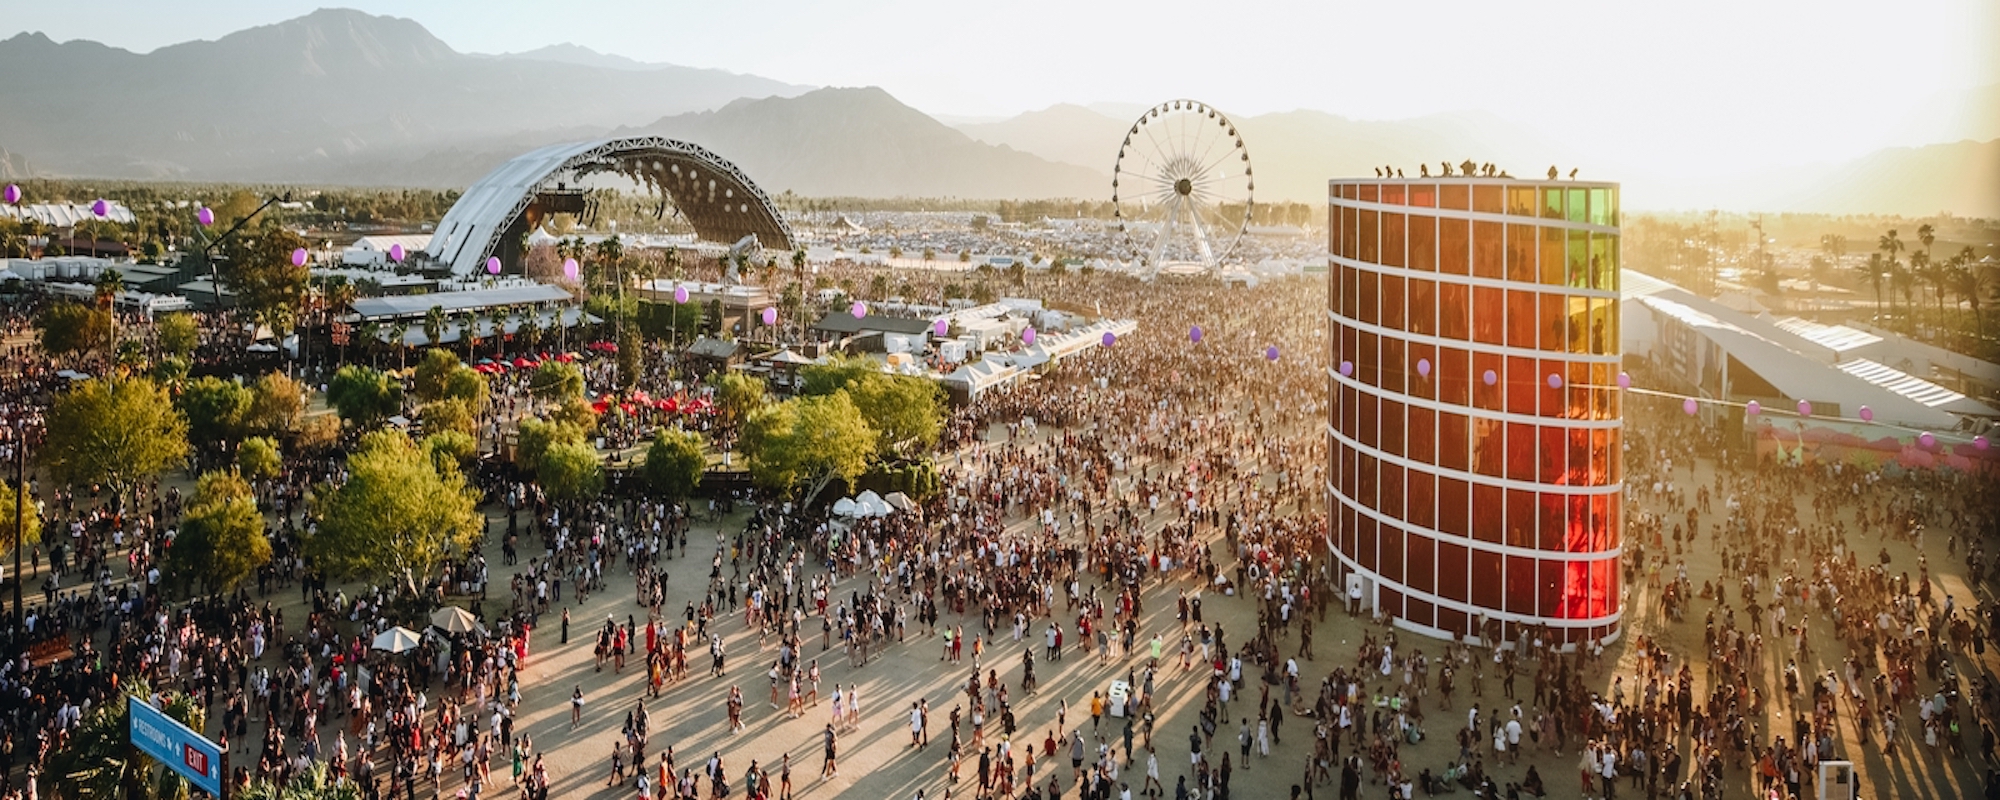 Coachella to Sell Lifetime Festival Passes, VIP Experiences as NFTs